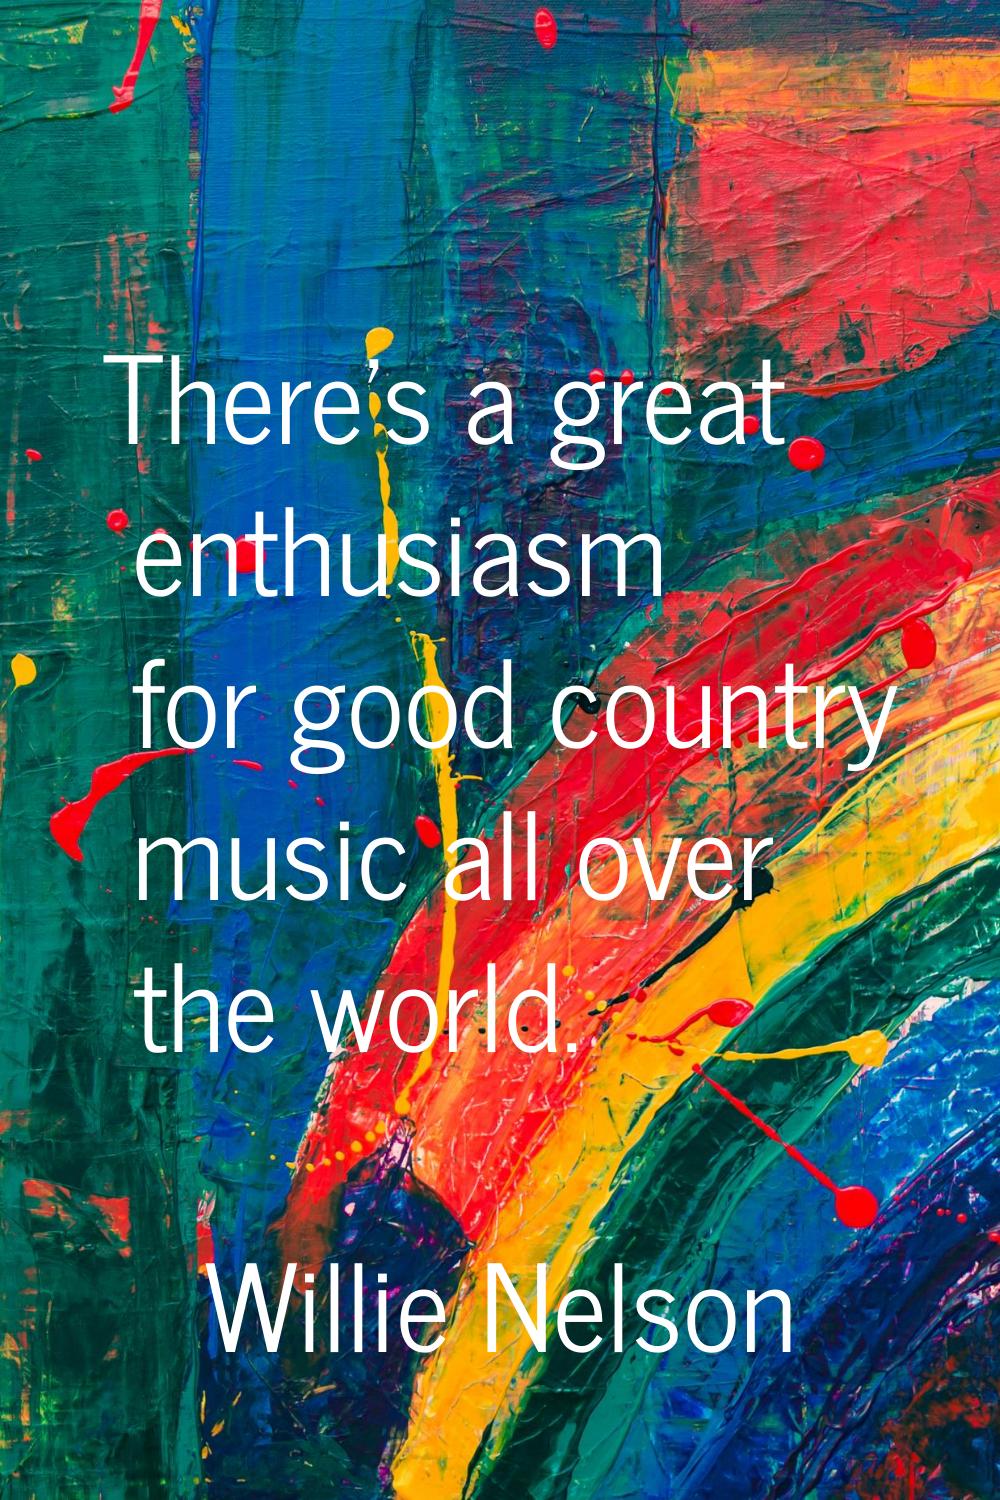 There's a great enthusiasm for good country music all over the world.